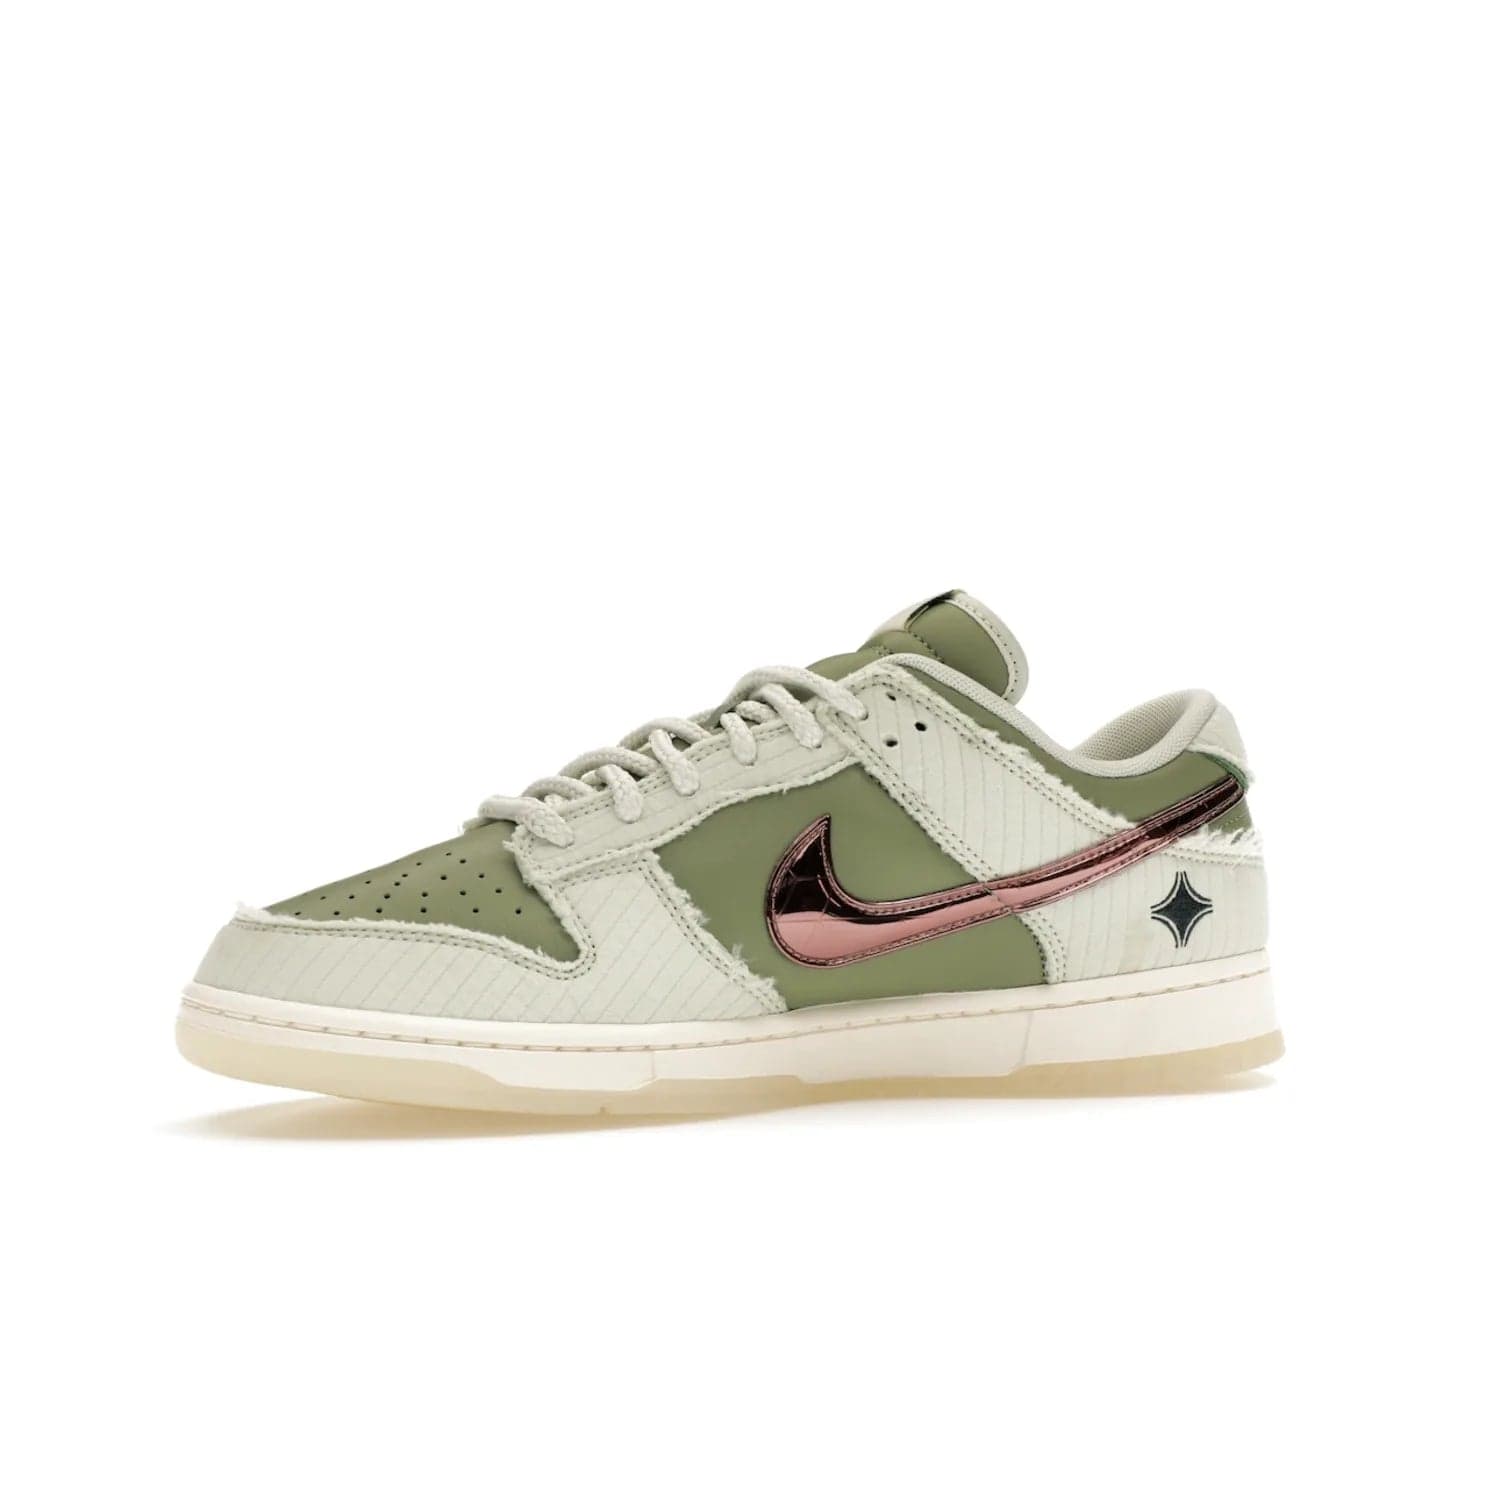 Nike Dunk Low Retro PRM Kyler Murray Be 1 of One - Image 17 - Only at www.BallersClubKickz.com - Introducing the Nike Dunk Low Retro PRM Kyler Murray "Be 1 of One"! A Sea Glass upper with Sail and Oil Green accents, finished with Rose Gold accents. Drop date: November 10th.